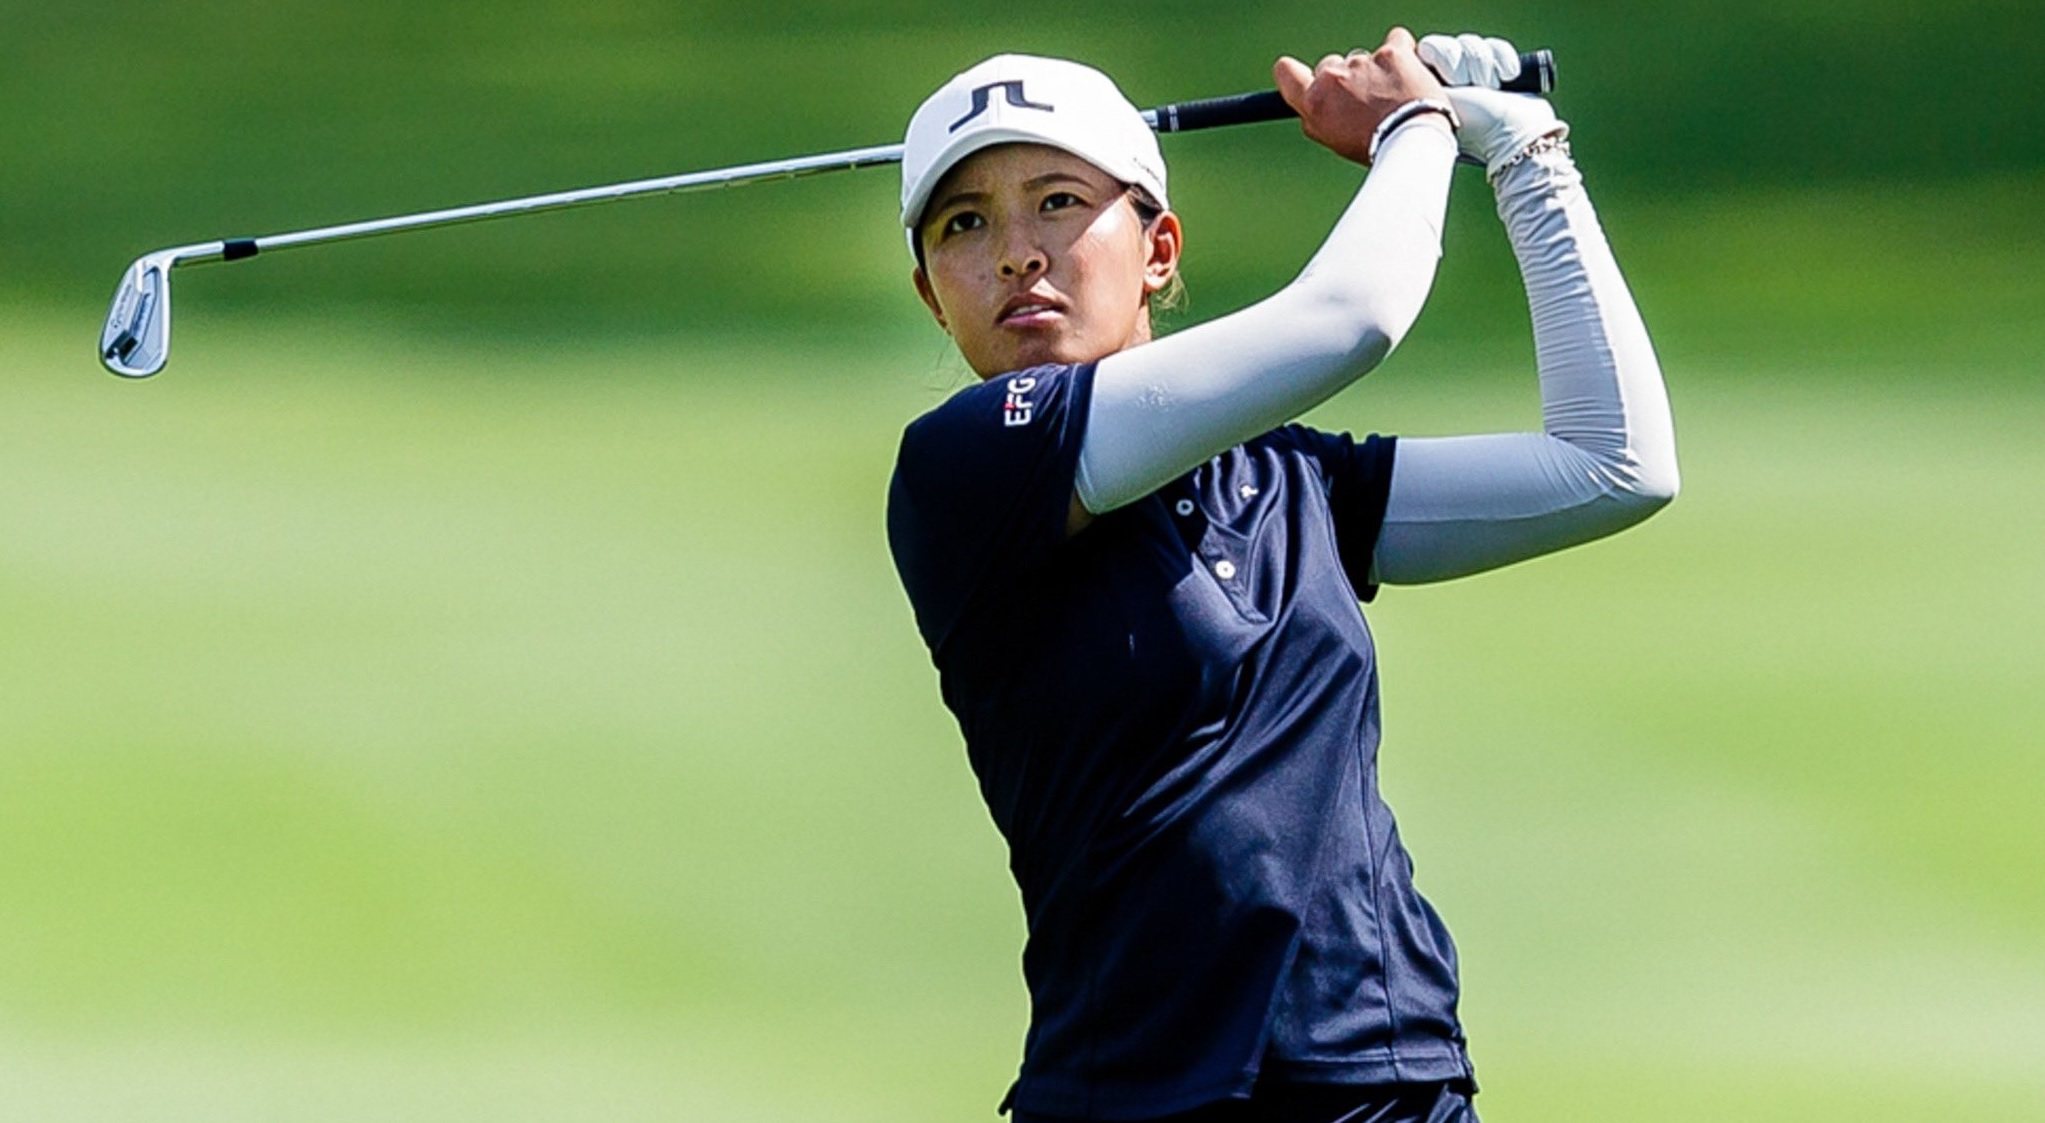 Hong Kong golfer Tiffany Chan is tied seventh after three rounds of the LPGA Tour’s LA Open. Photo: HKGC